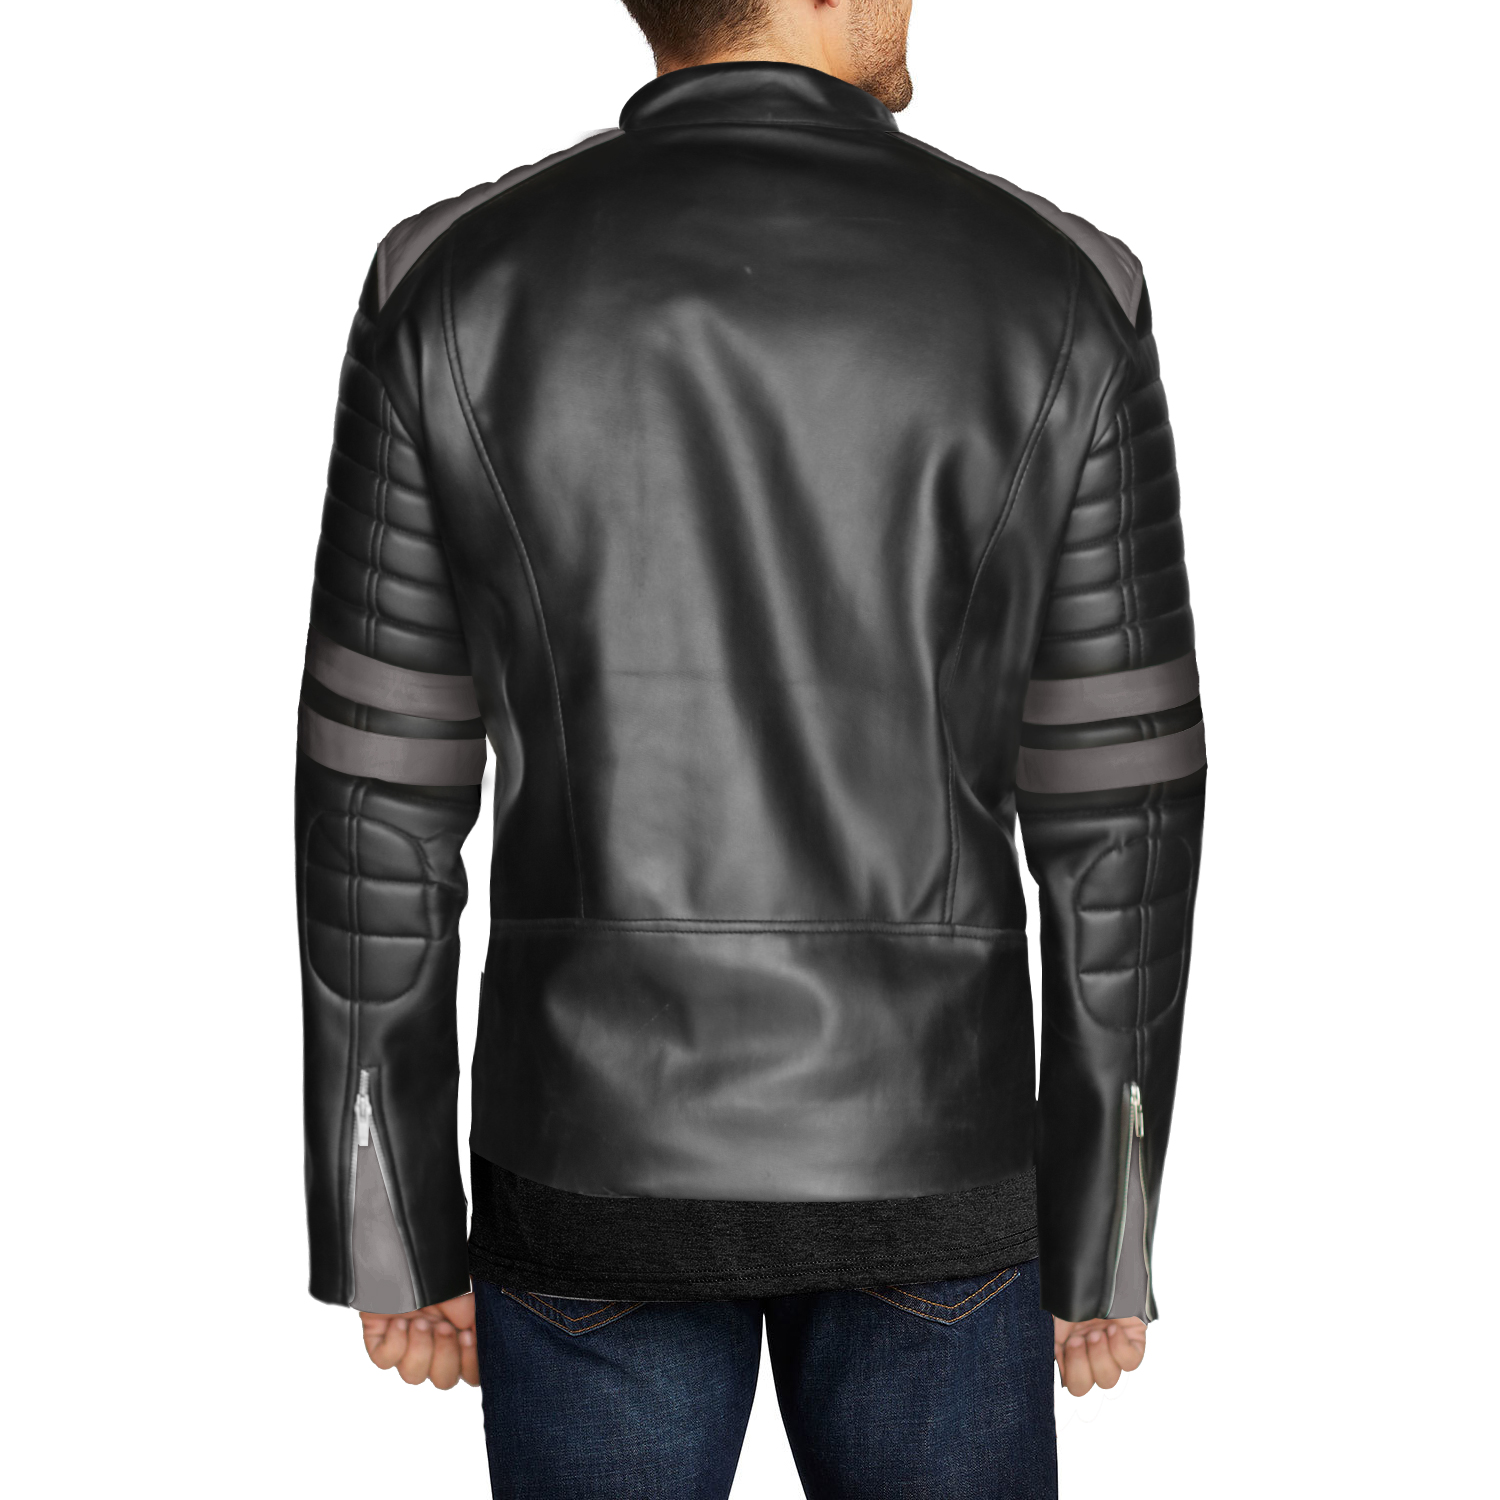 NomiLeather black leather jacket | mens leather jacket and genuine leather jacket men (Black With Grey Strip ) X-Small - image 3 of 7